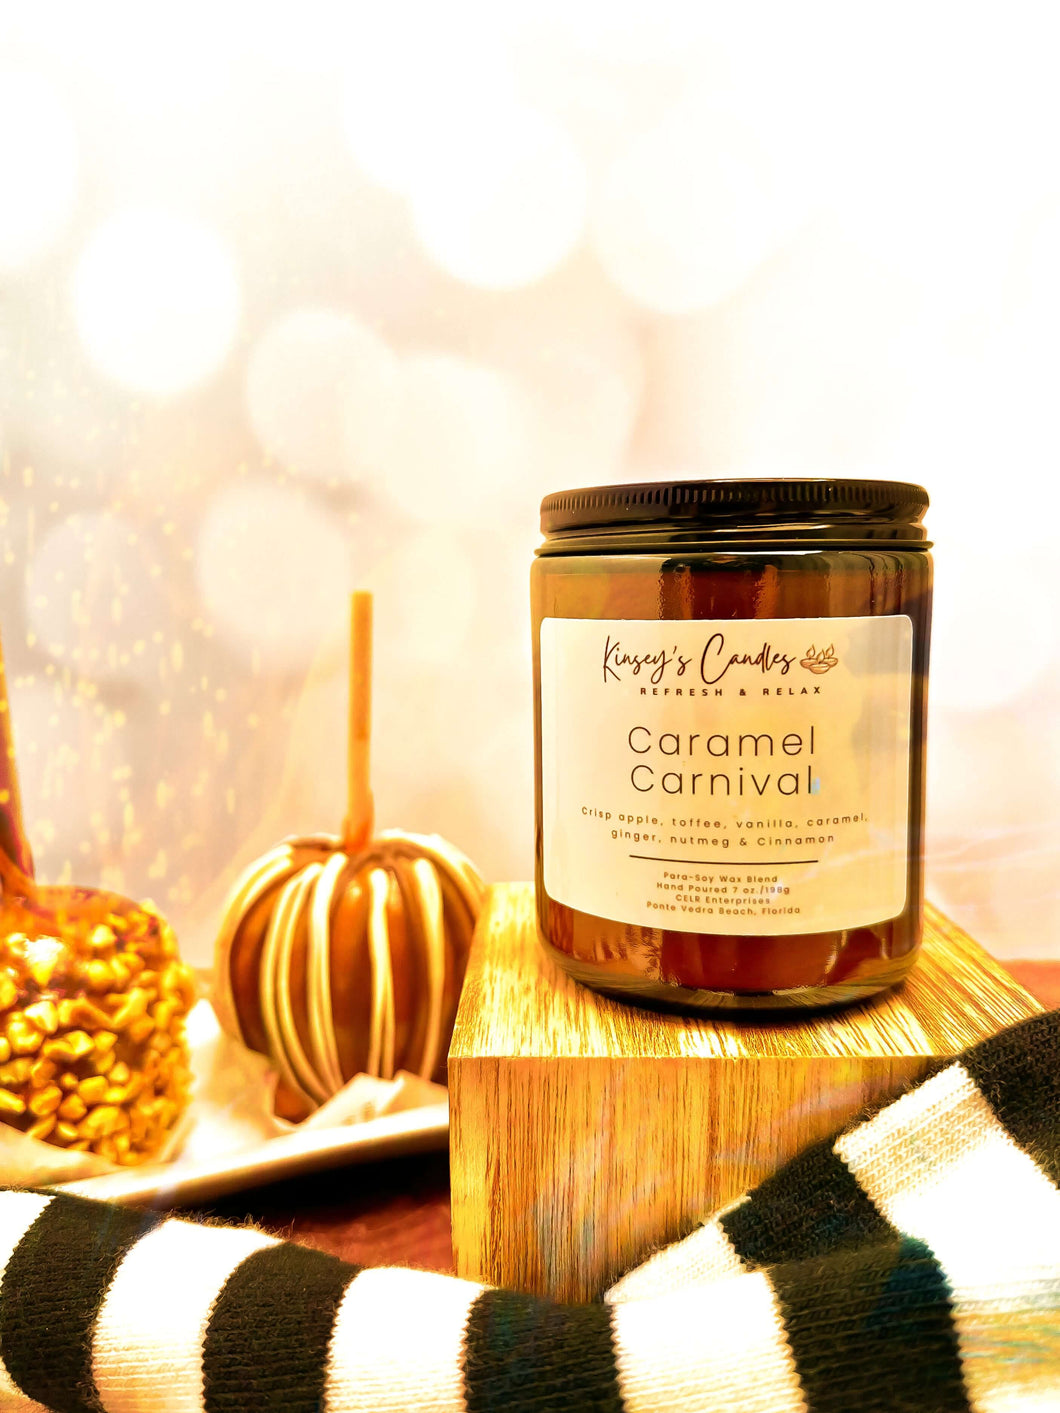 Caramel Carnival Candle - Kinsey's Candles